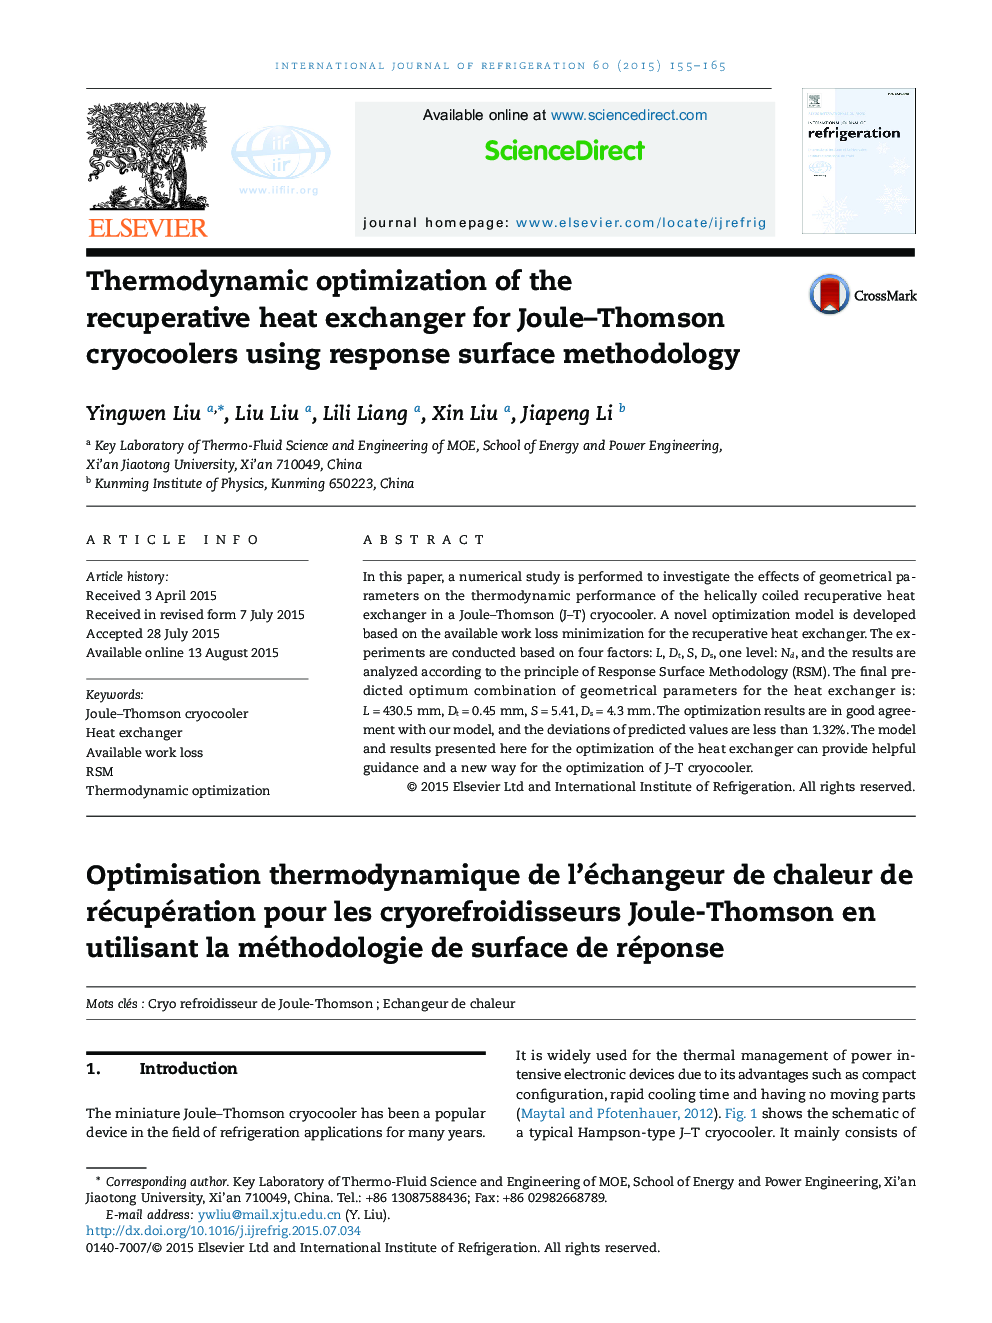 Thermodynamic optimization of the recuperative heat exchanger for Joule–Thomson cryocoolers using response surface methodology